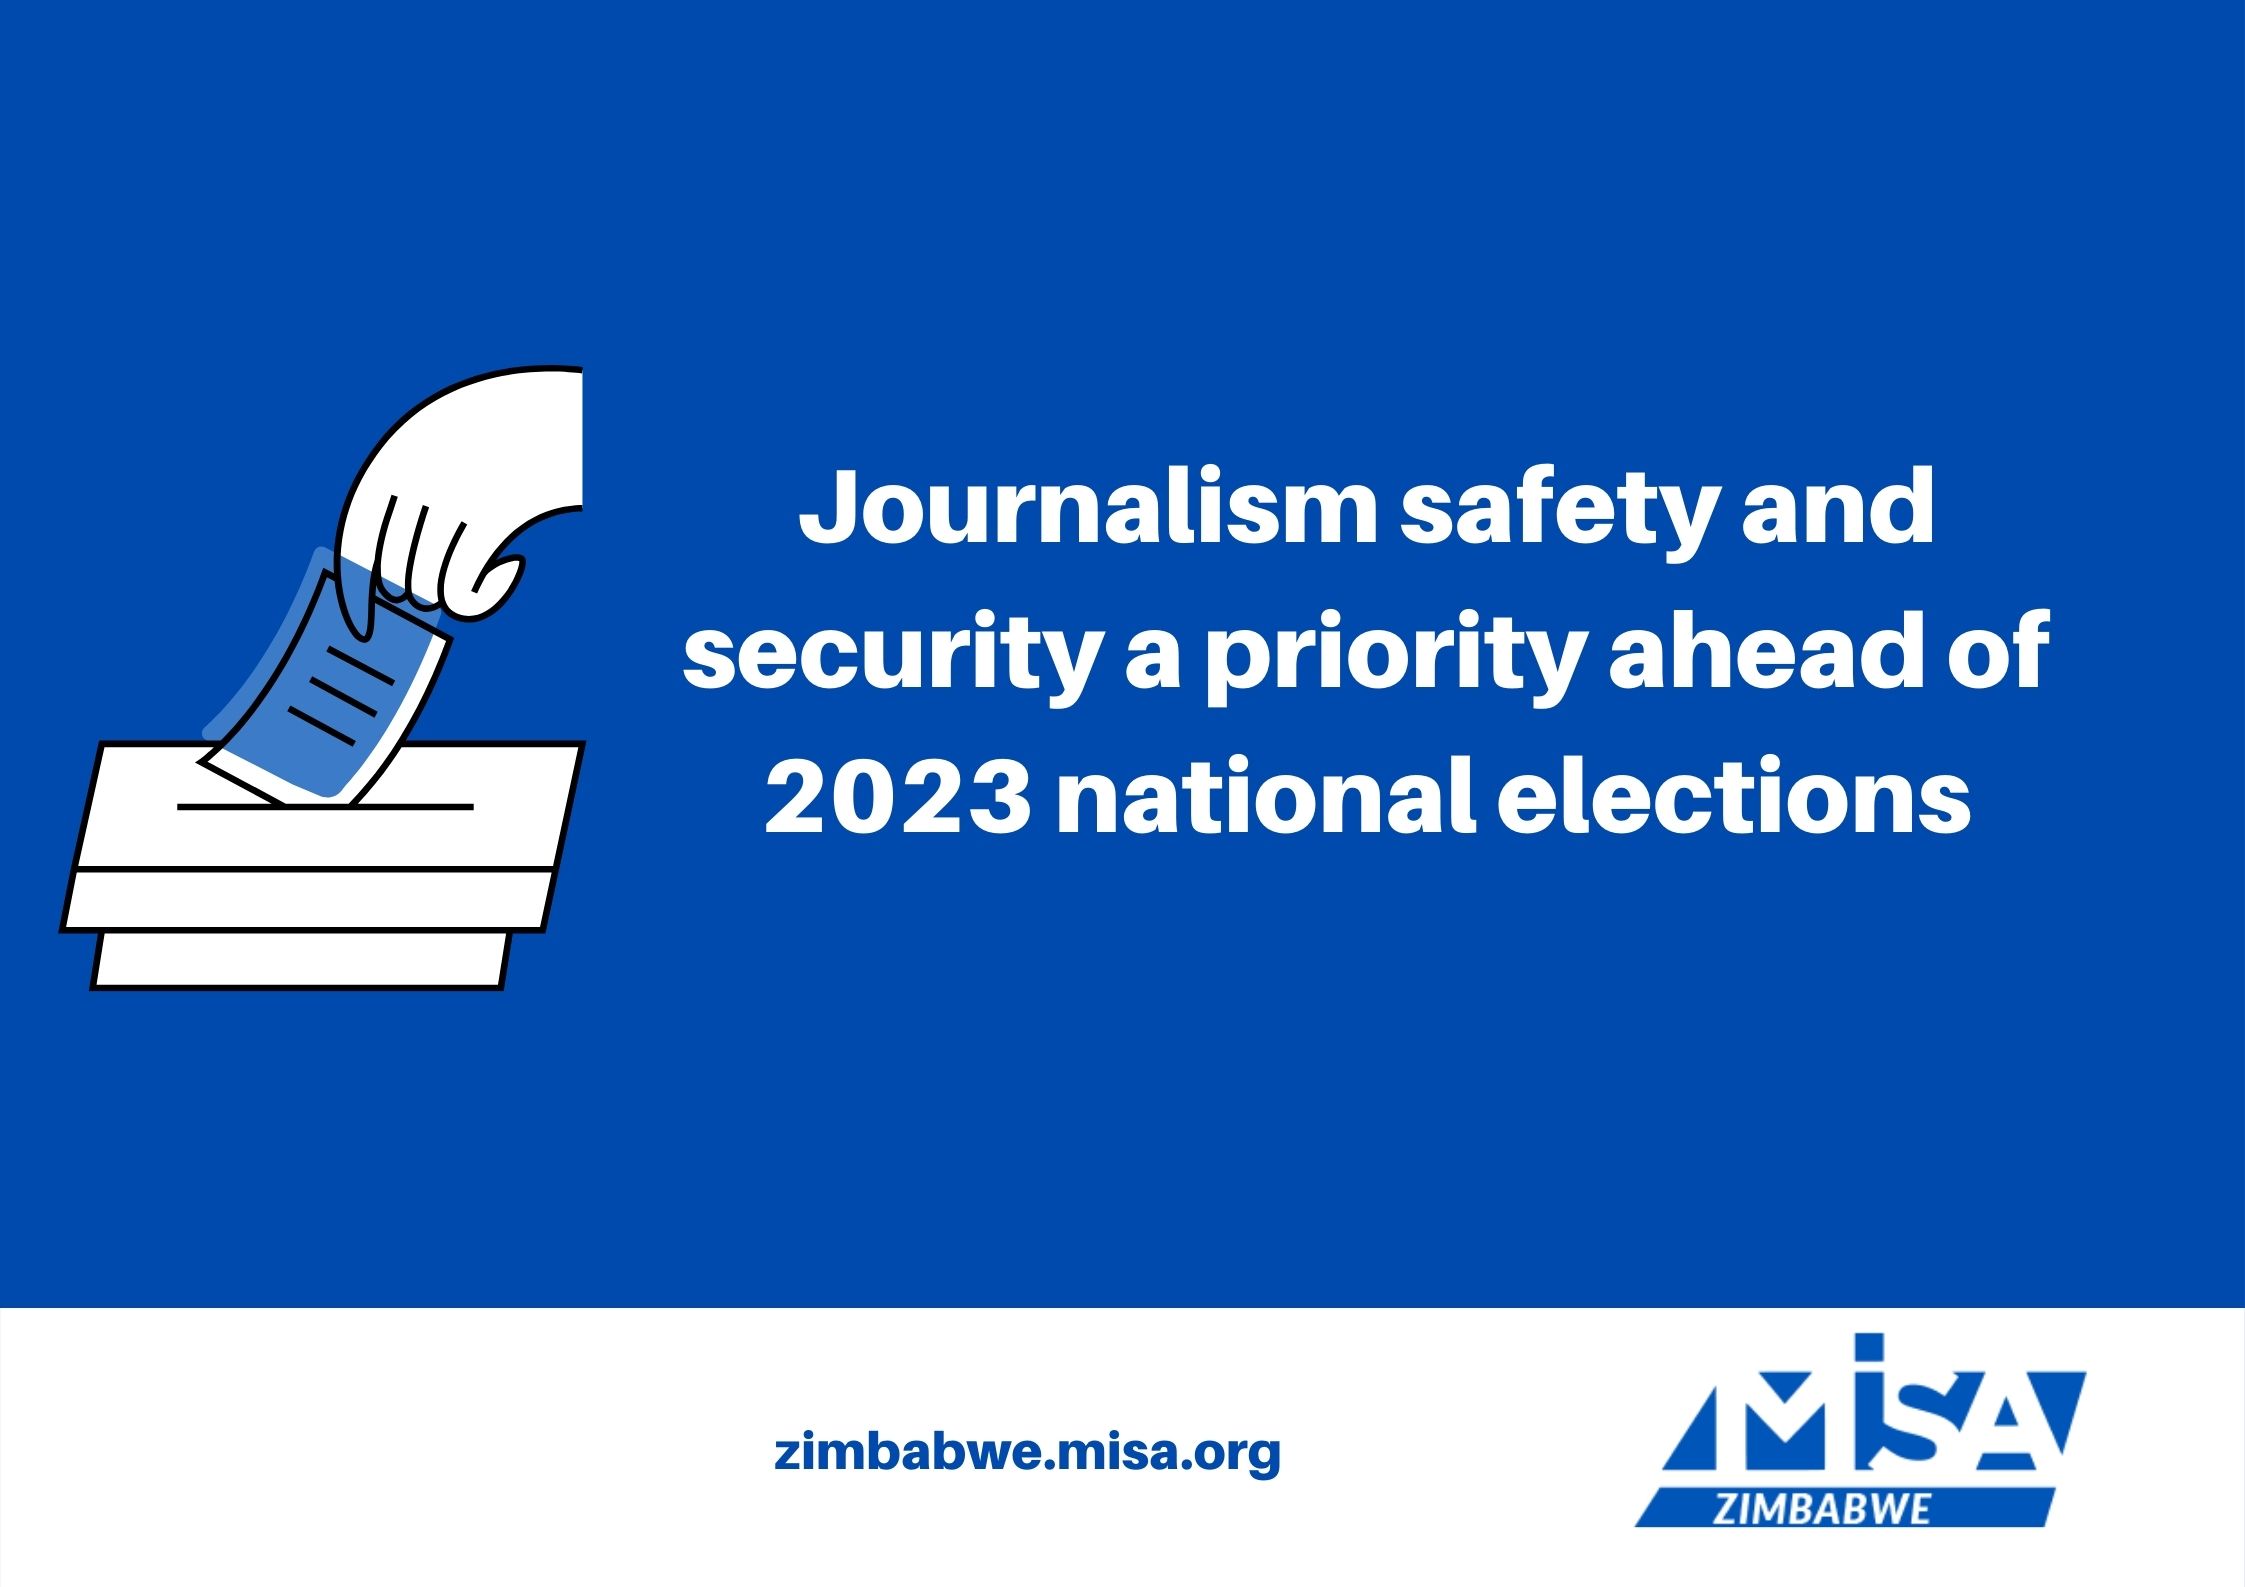 Journalism safety and security a priority ahead of 2023 national elections